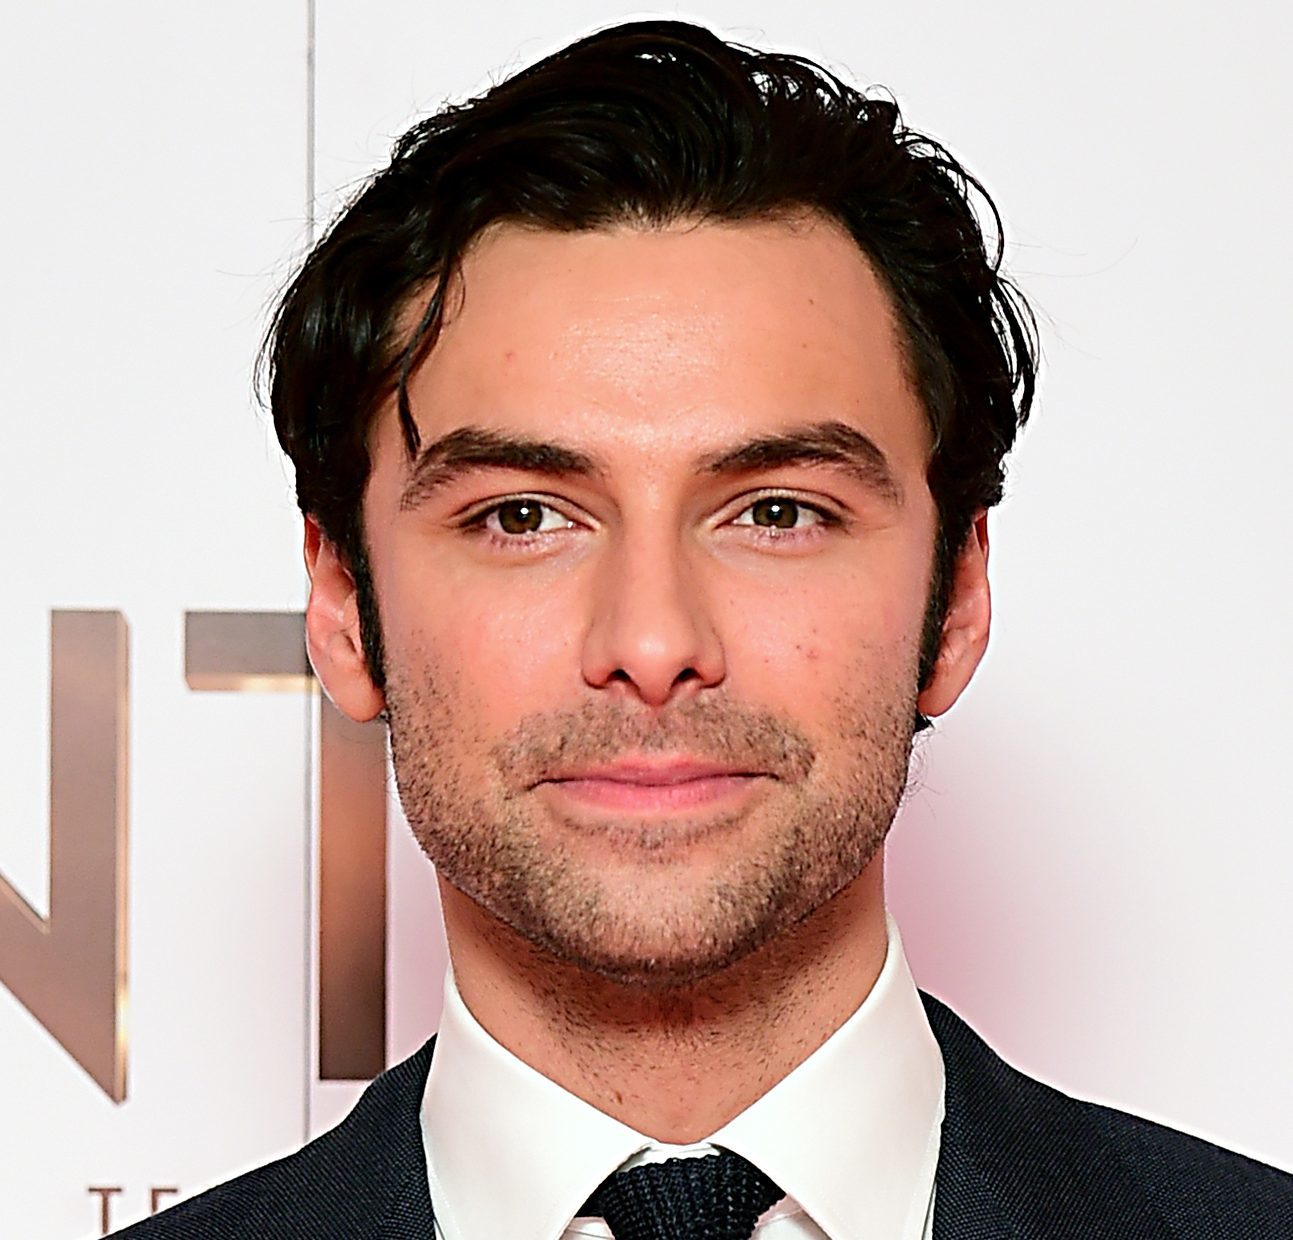 Irish actor Aidan Turner has played Cornish captain Ross Poldark in the BBC period drama since 2015, and will soon return to screens for the third series. (Ian West/PA Wire)